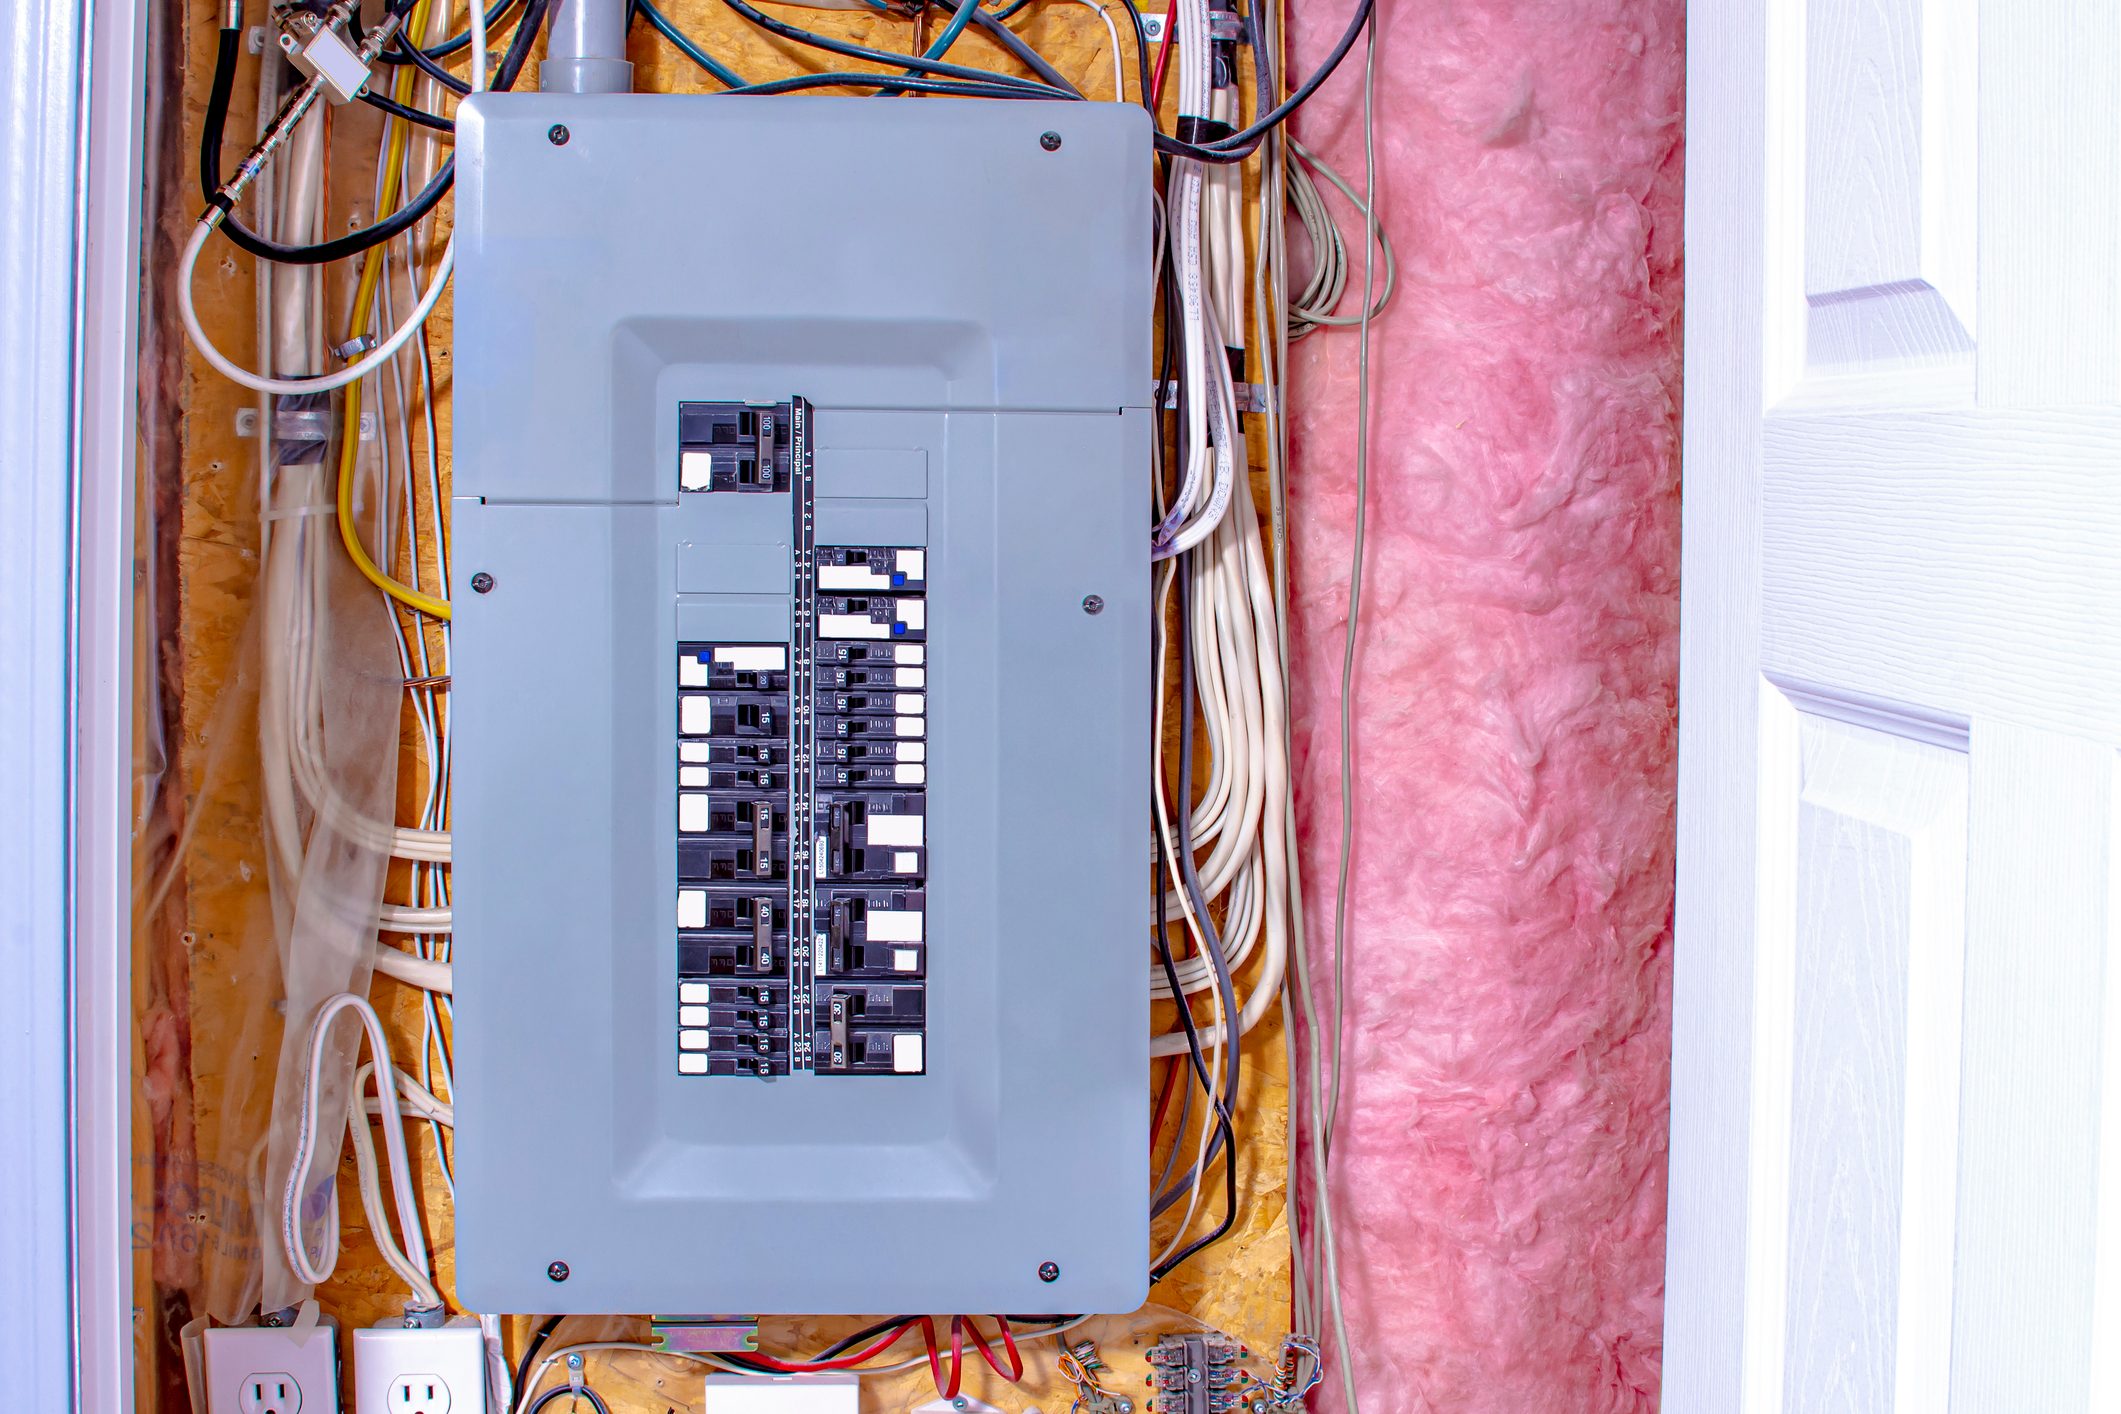 breaker box on a wall with wires and insulation